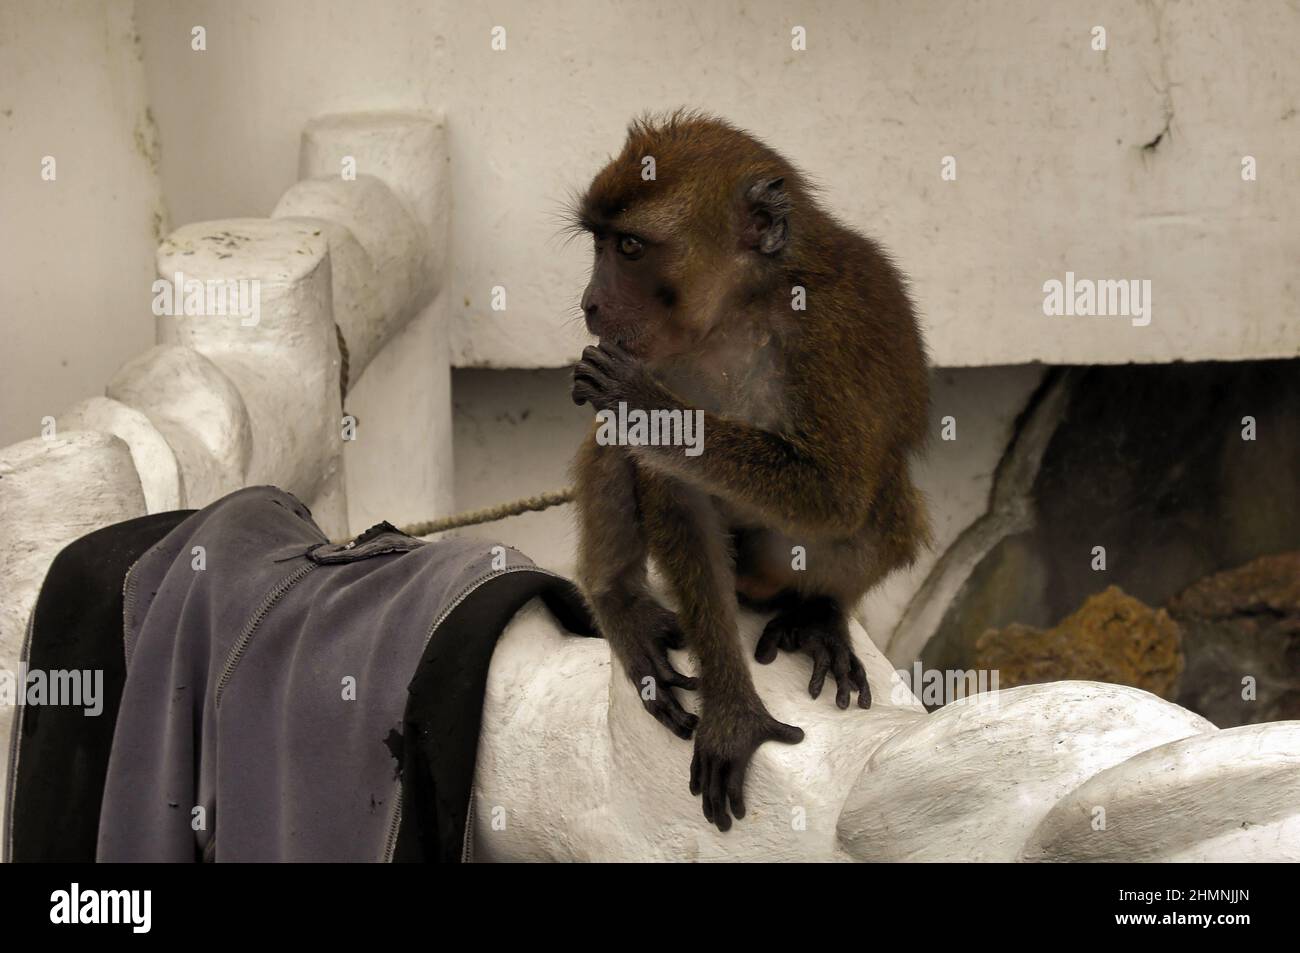 Lovely little monkey in Sabang on the Philippines December 29, 2010 Stock Photo